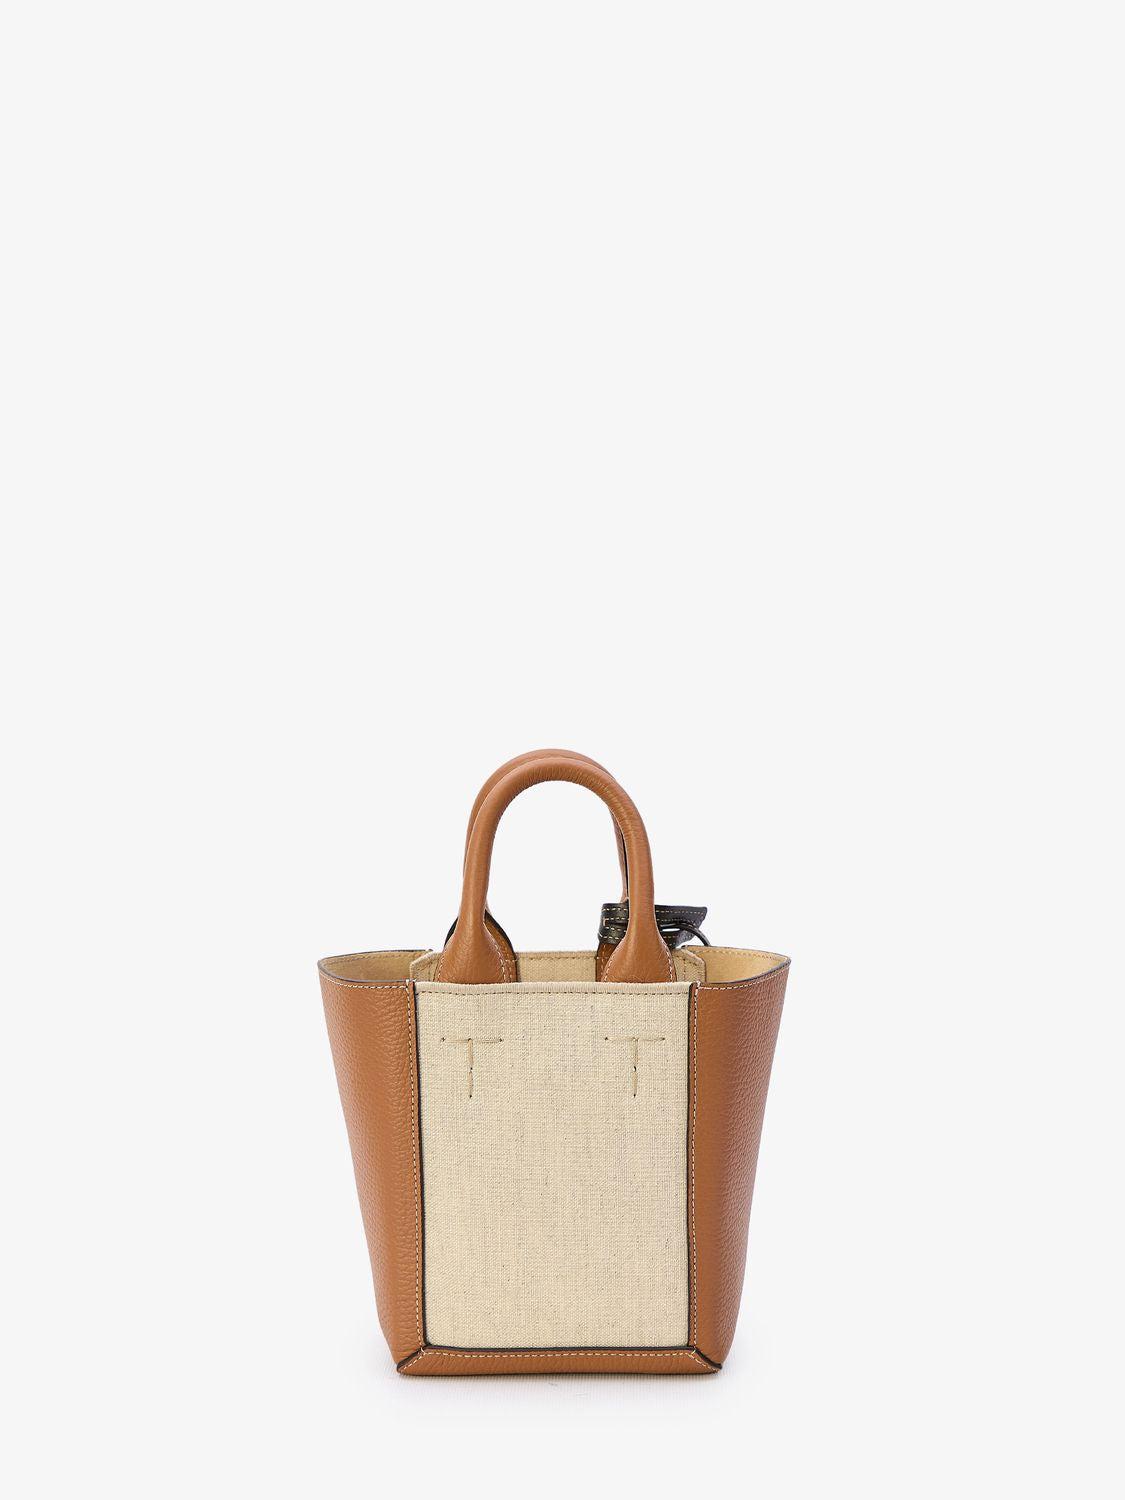 TOD'S Mini Duo-Tone Leather and Canvas Tote with Detachable Strap and Charm, Brown and Cream - 27x17x12 cm